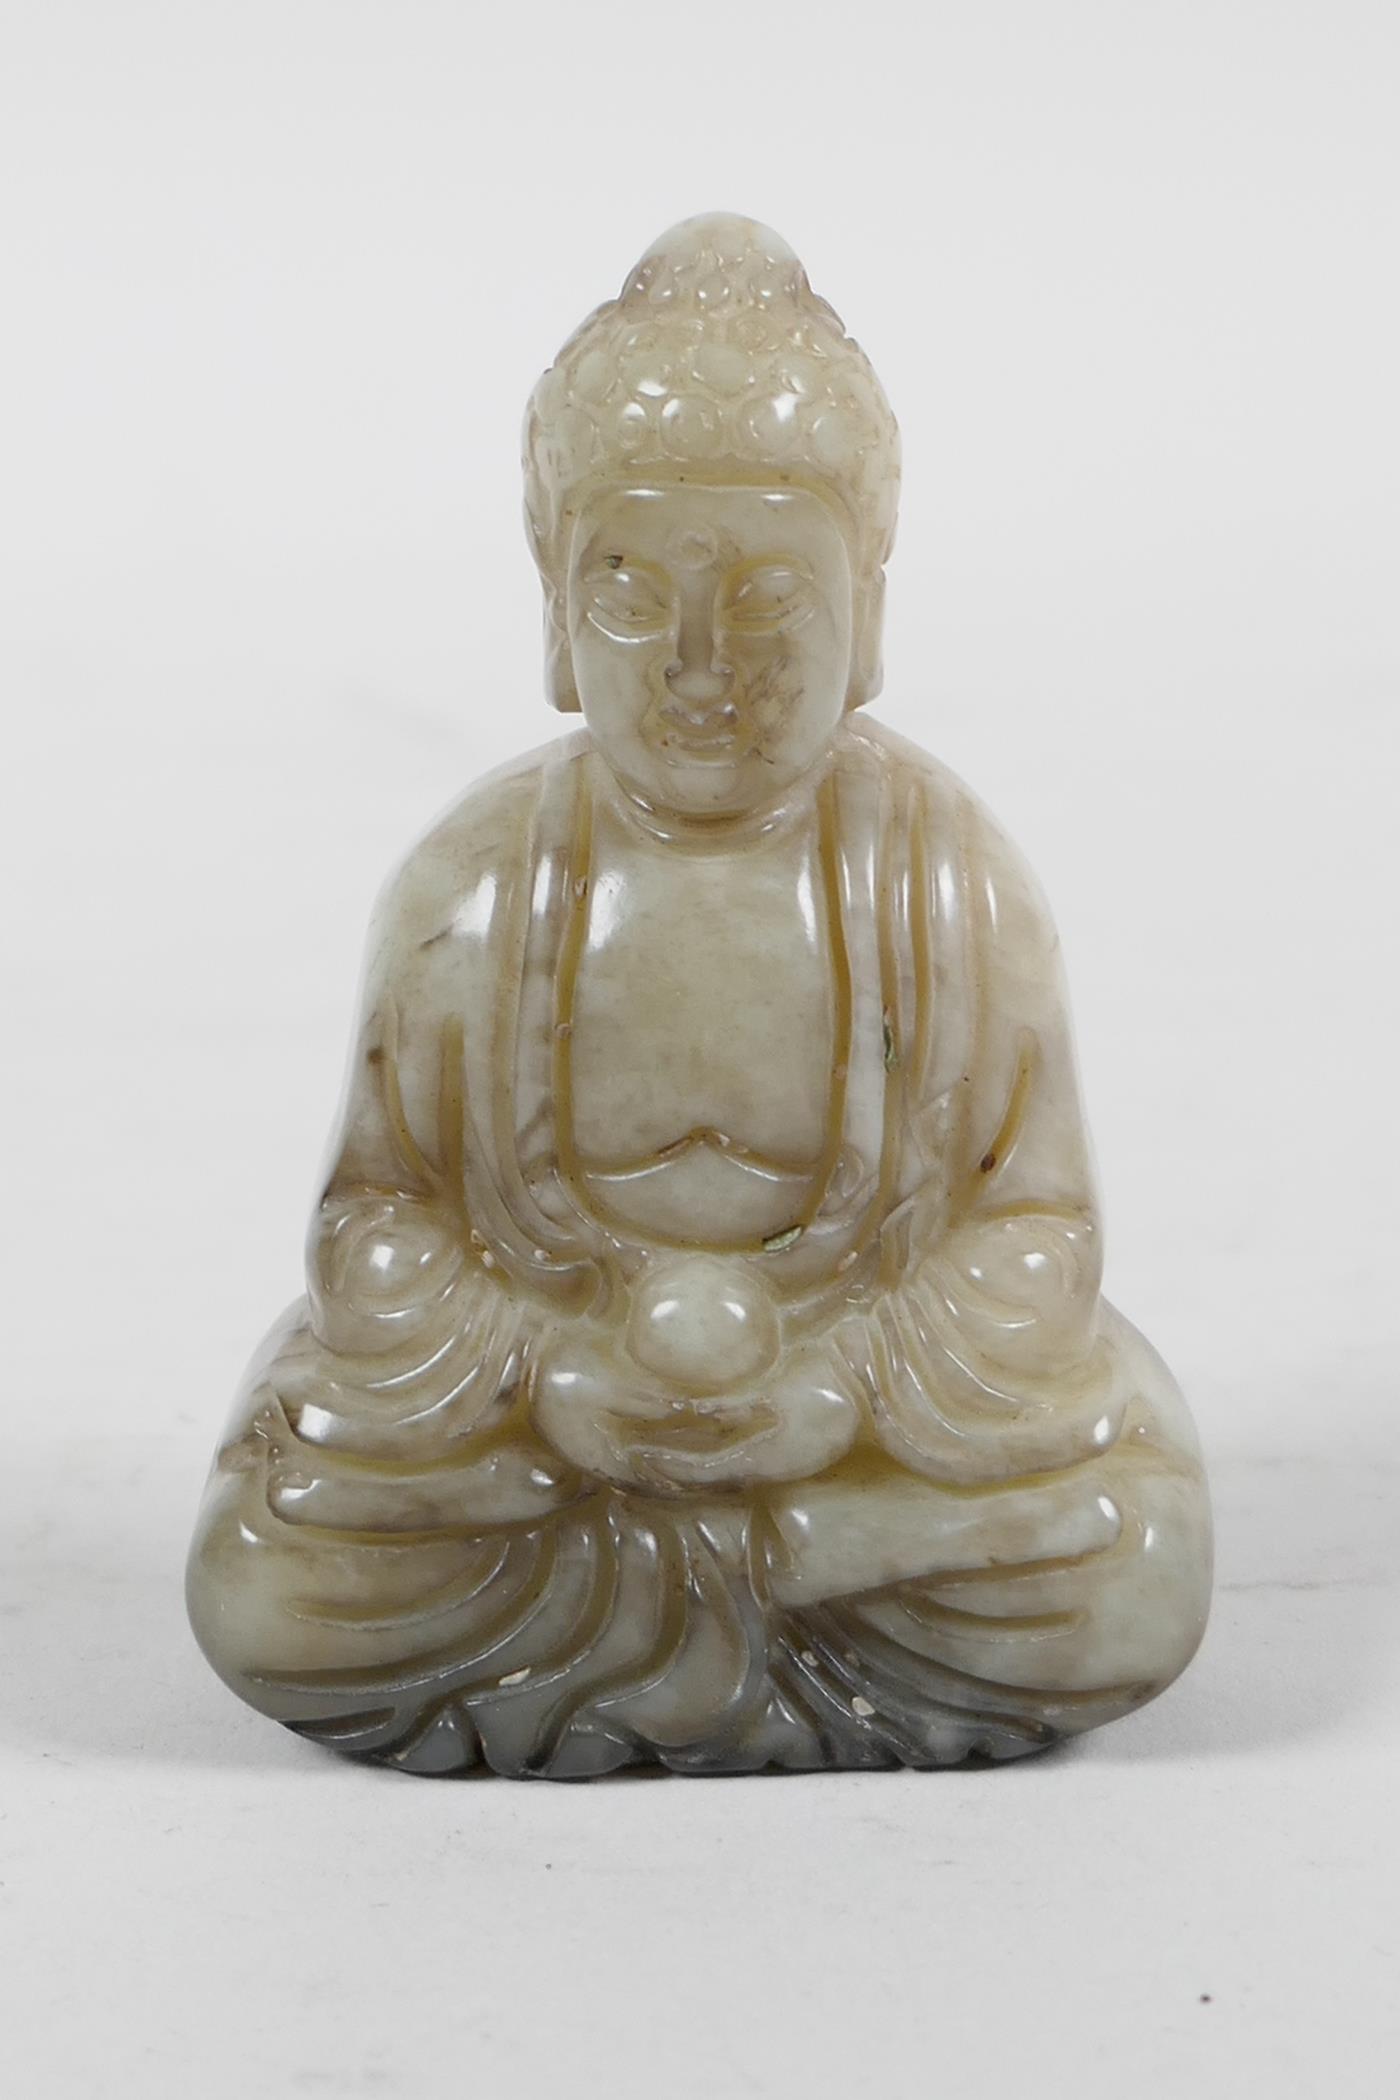 A Chinese mottled hardstone carving of Buddha, 2½" high